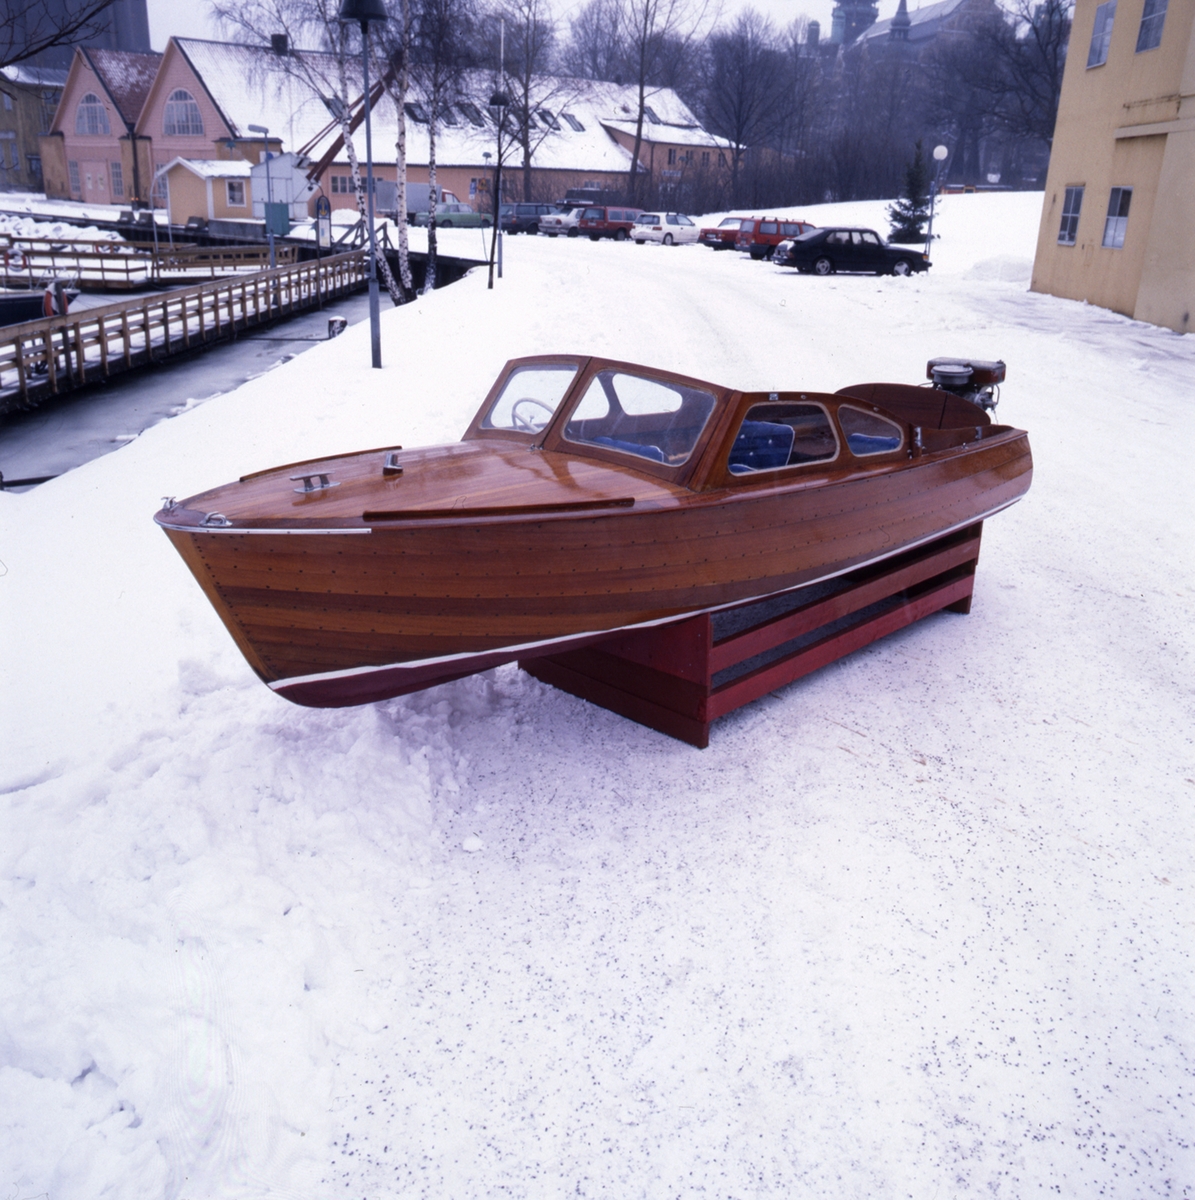 C. G. Pttersson is said to have been the first designer to create a camping boat. We will never be sure if that is true, but he was certainly one of many designers during the first half of the 20th century who designed small boats for outboard engines and with a wondscreen for protection at high speed. Camping boats were usuallt lapstrake built and constructed at most boatyards along the coast.

Camping trips became a popular activity as people got more days off. Camping boats were designed for day weekend trips in the archipelago with a tent, a spirit stove and tined food. The seats were often removable, and if the crew was not too numerous inflatable beds could be laid out on the flooring.

The boats were mass produced and sold complete with an engine at an affordable price.

The campingboat in the National Maritime Museum was sold by Elektrolux in Uppsala in 1958. It was added to the museum's collection in 1981. Just twenty years ago there were still many camping boats in active use, but due to their low resale value and flimsy build only a few boats remain today. 